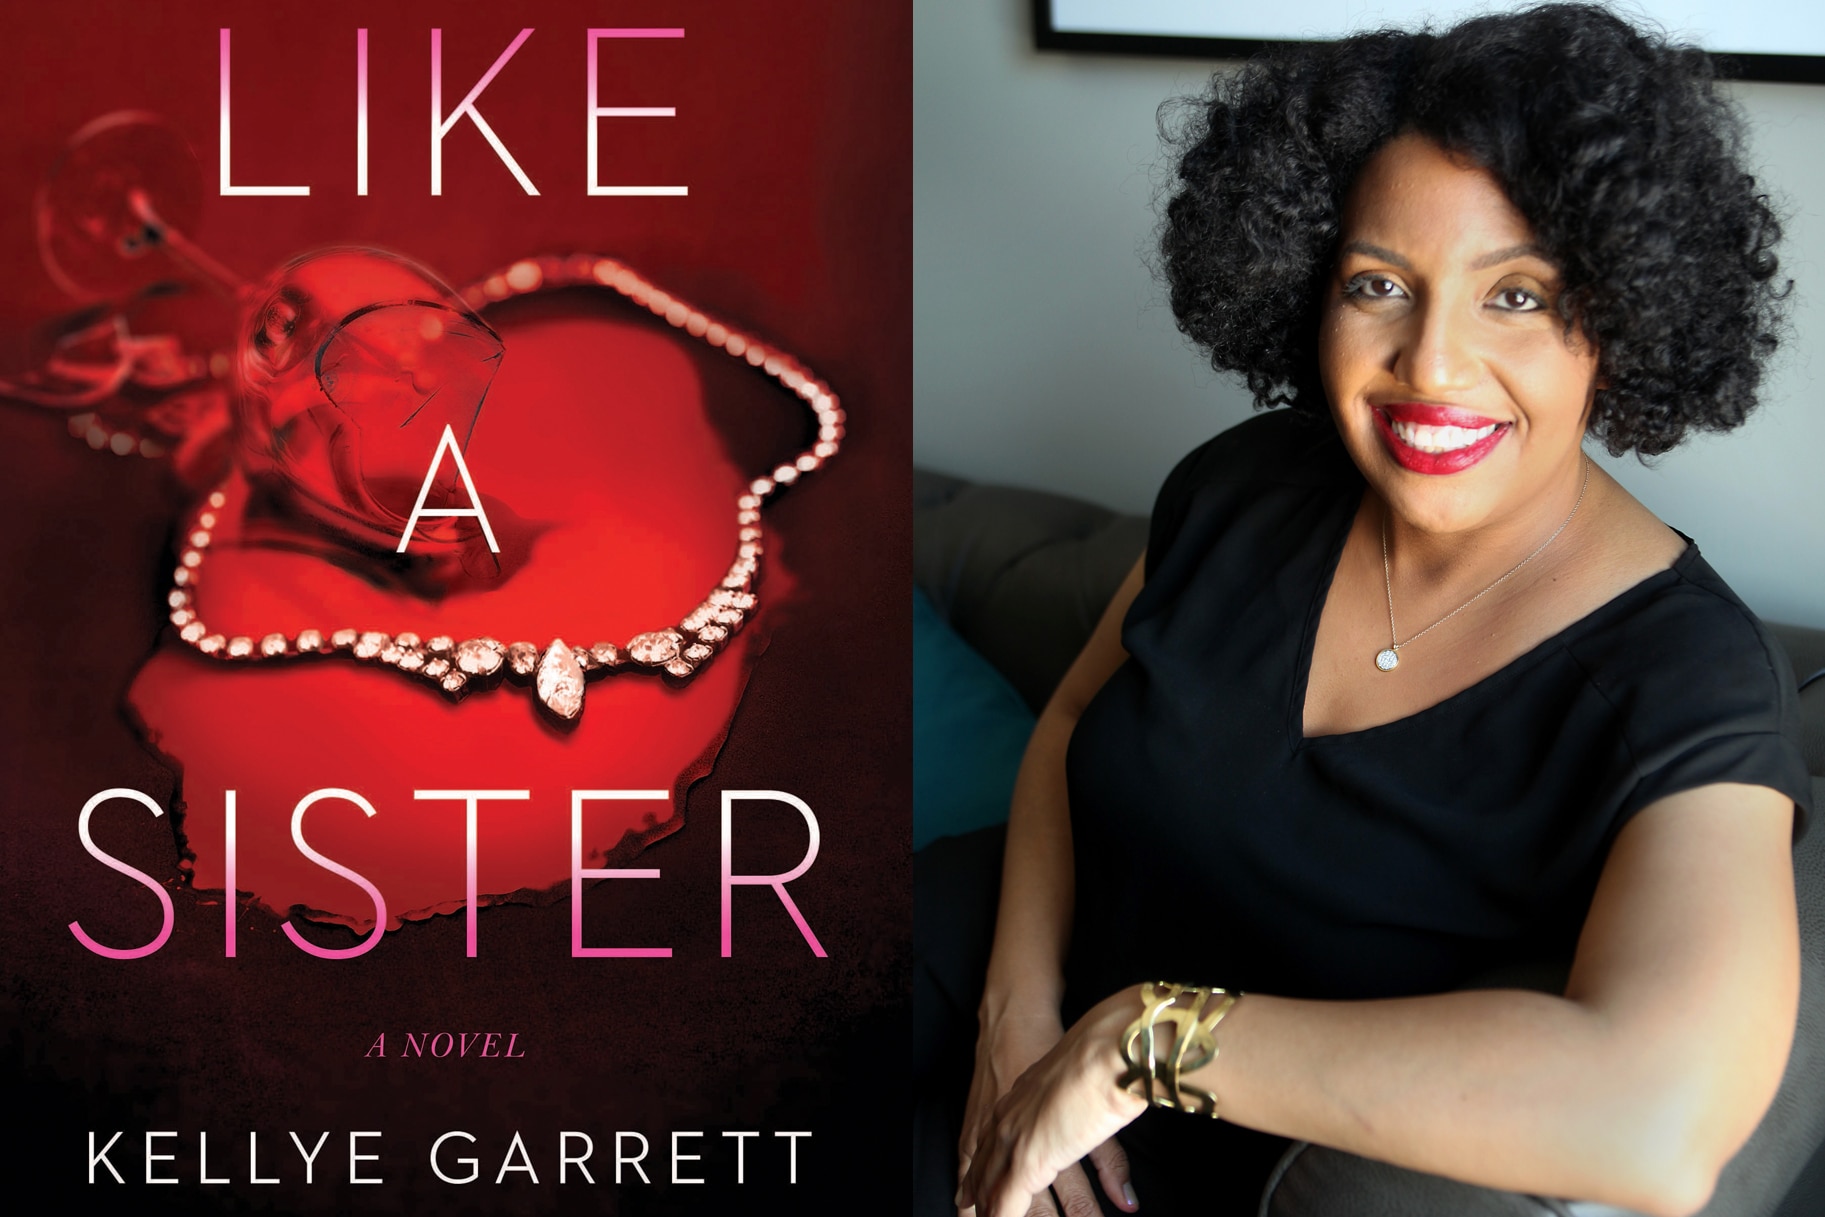 A book cover of Like A Sister by author Kellye Garrett